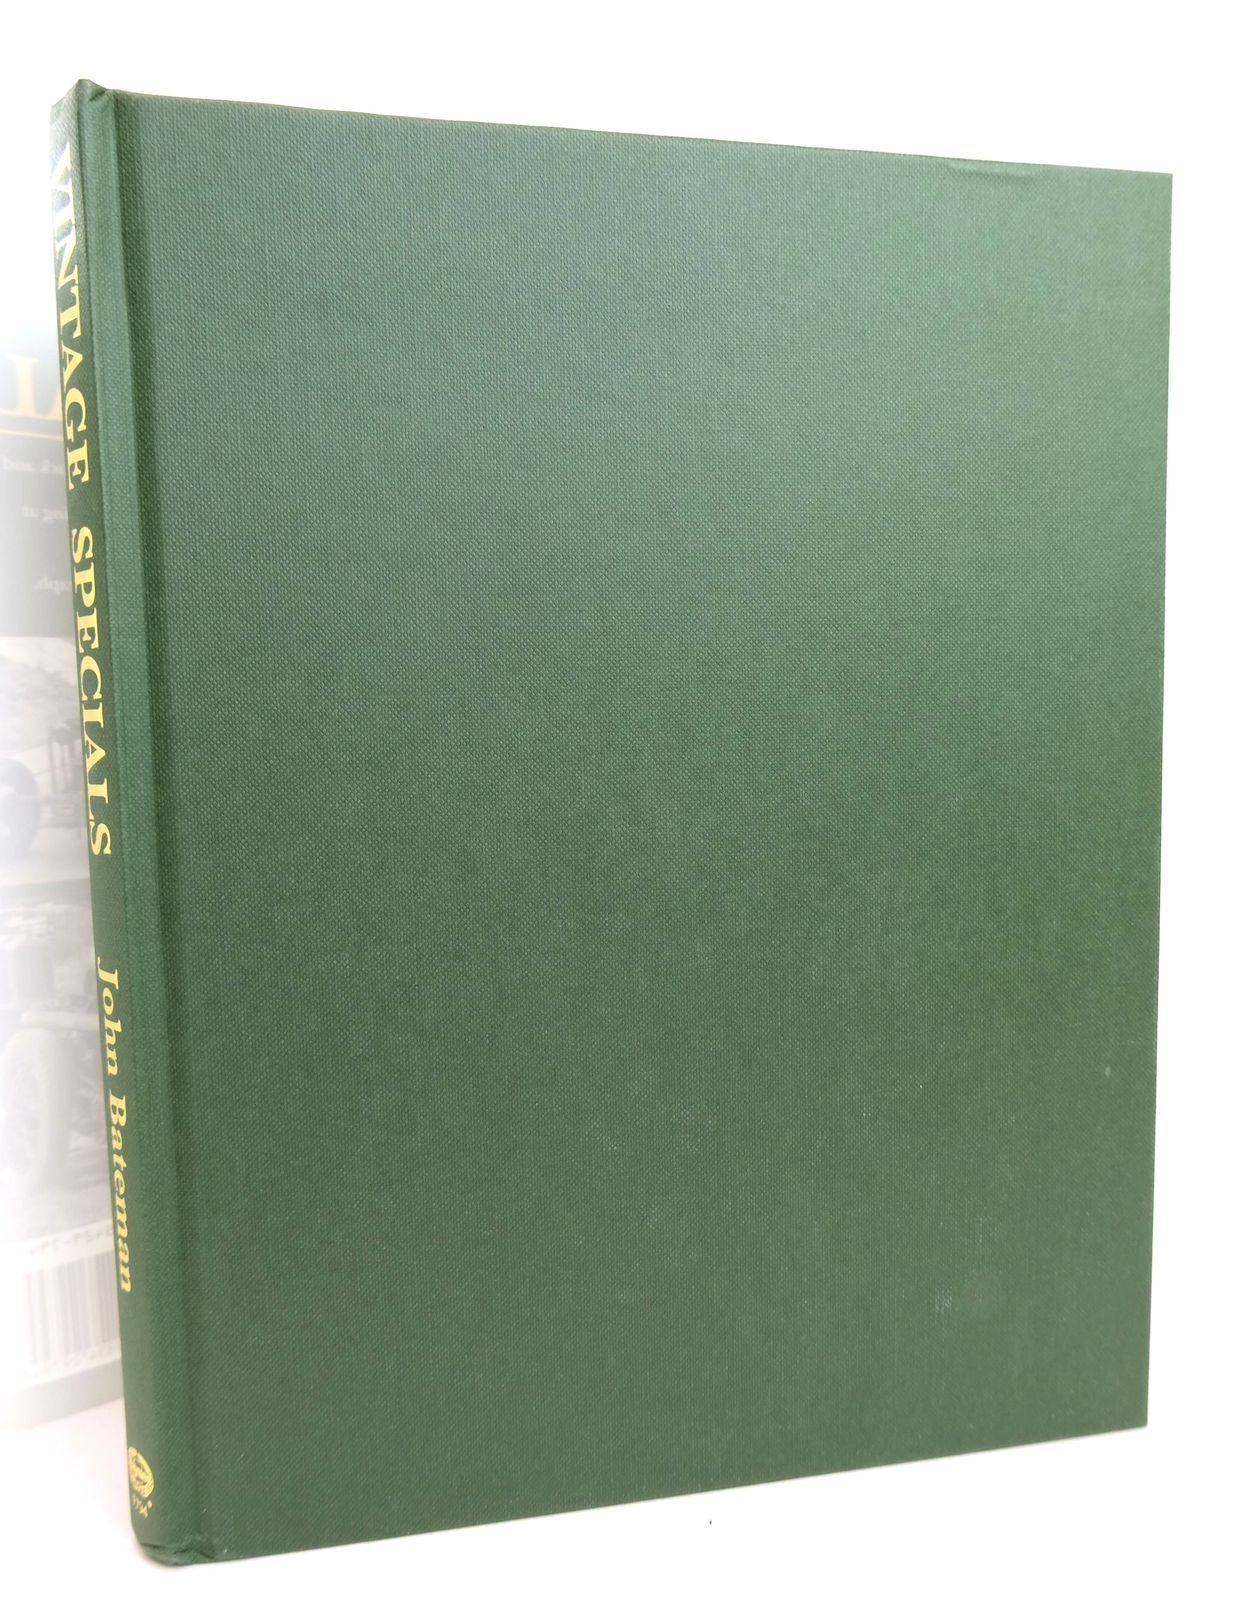 Photo of THE ENTHUSIAST'S GUIDE TO VINTAGE SPECIALS written by Bateman, John published by Foulis, Haynes (STOCK CODE: 1818700)  for sale by Stella & Rose's Books